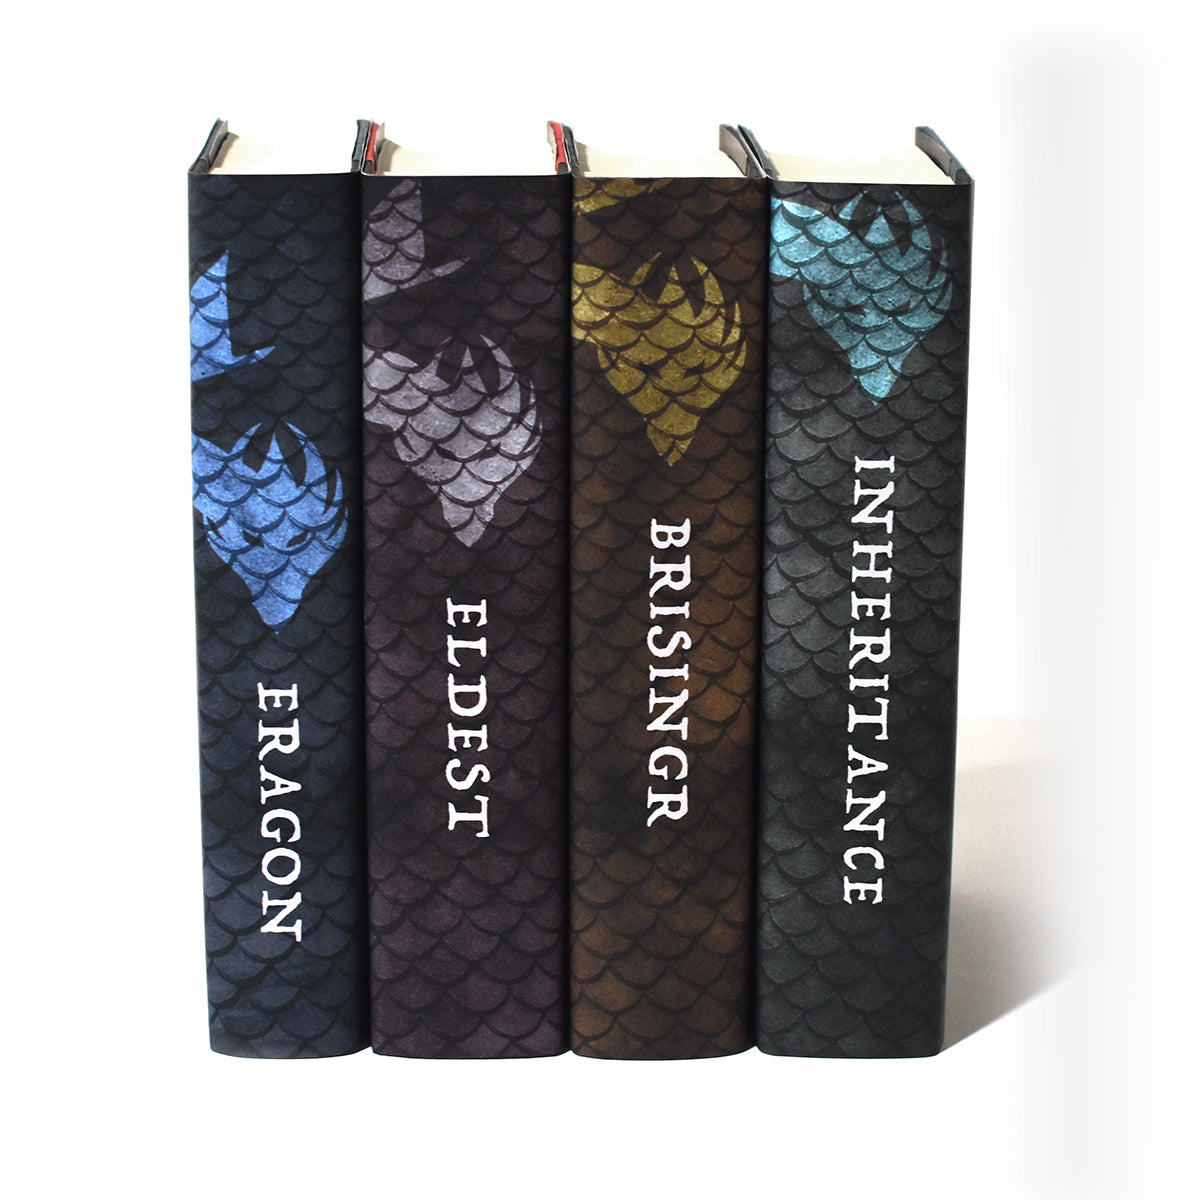 the inheritance cycle books